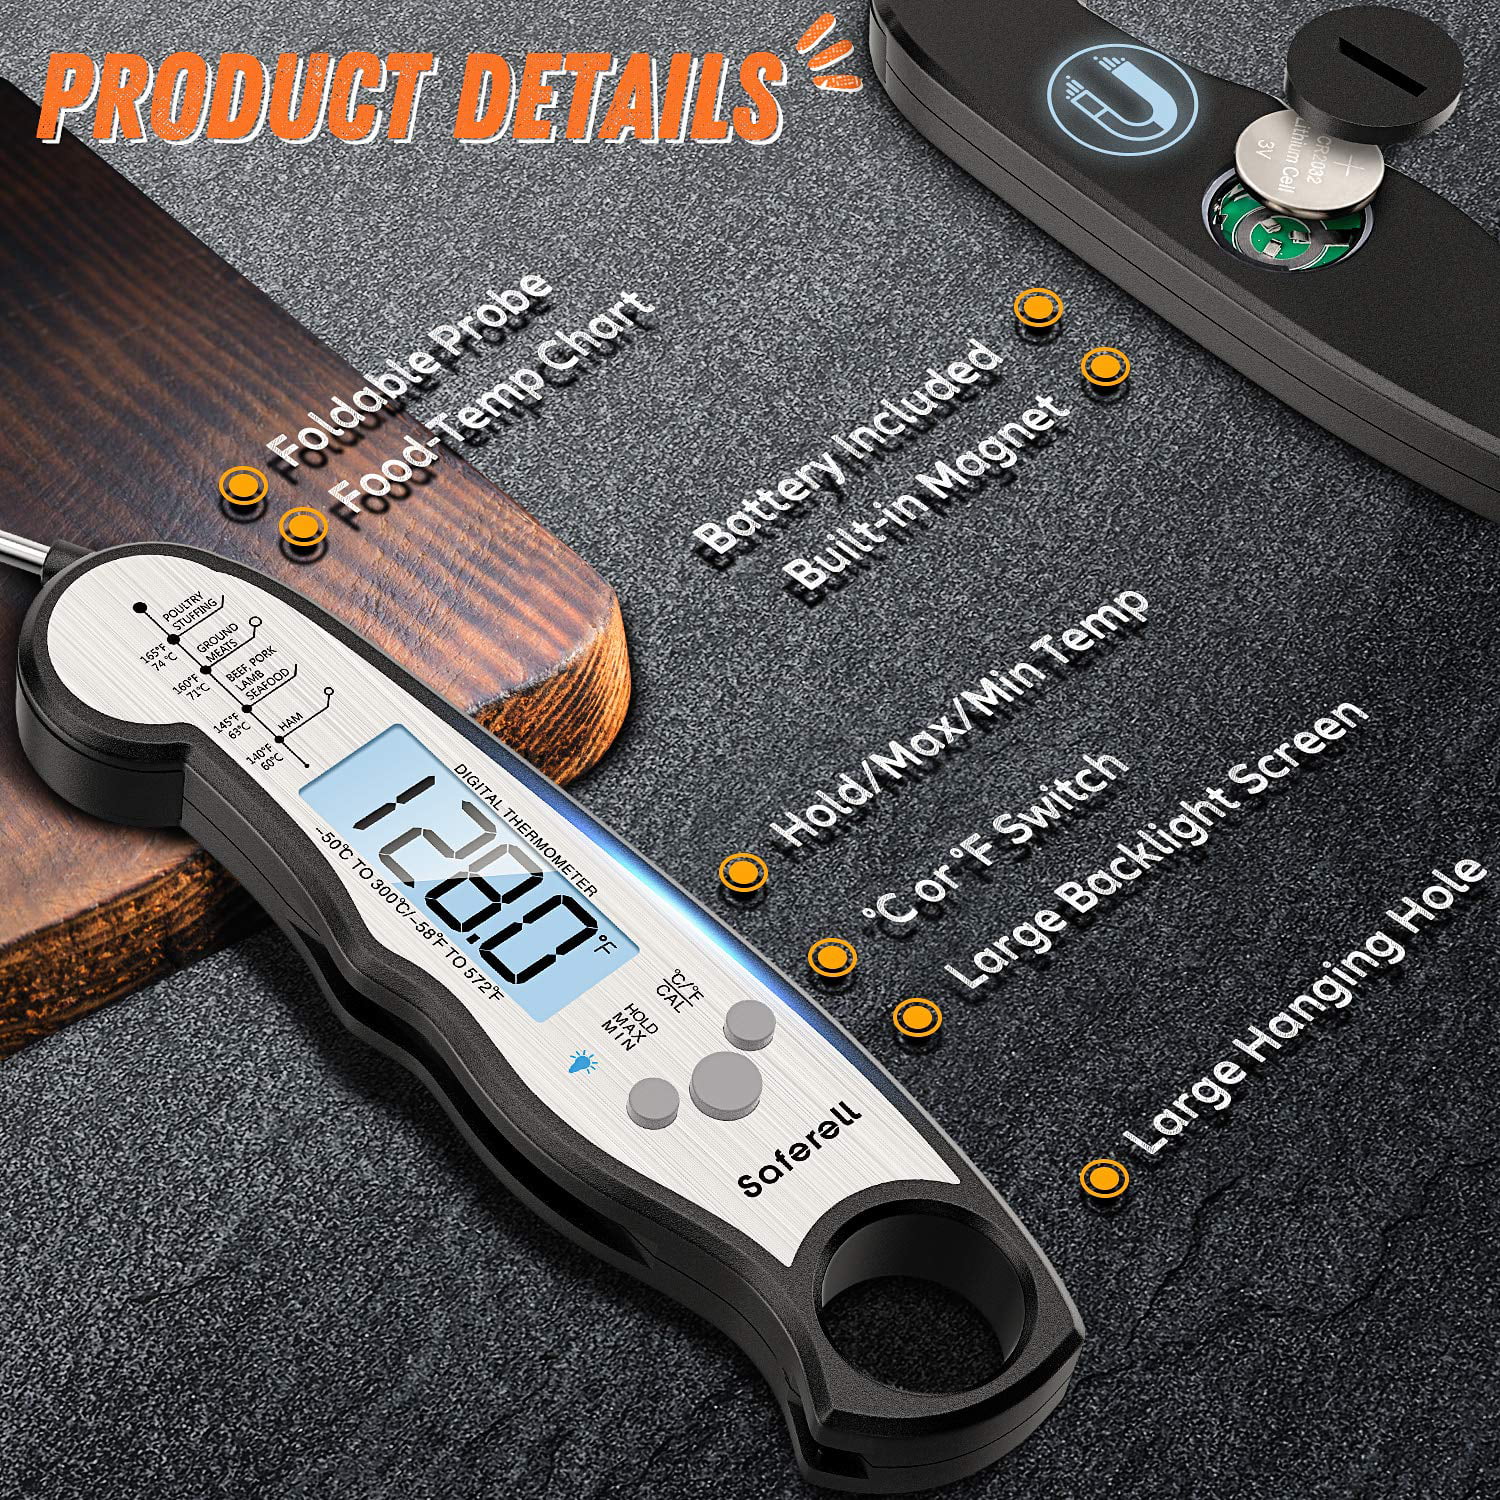 Goodful Wired Probe Meat Thermometer with Timer, Programmed with Preset  USDA Approved Temperatures for Different Types of Meat, Withstand  Temperatures